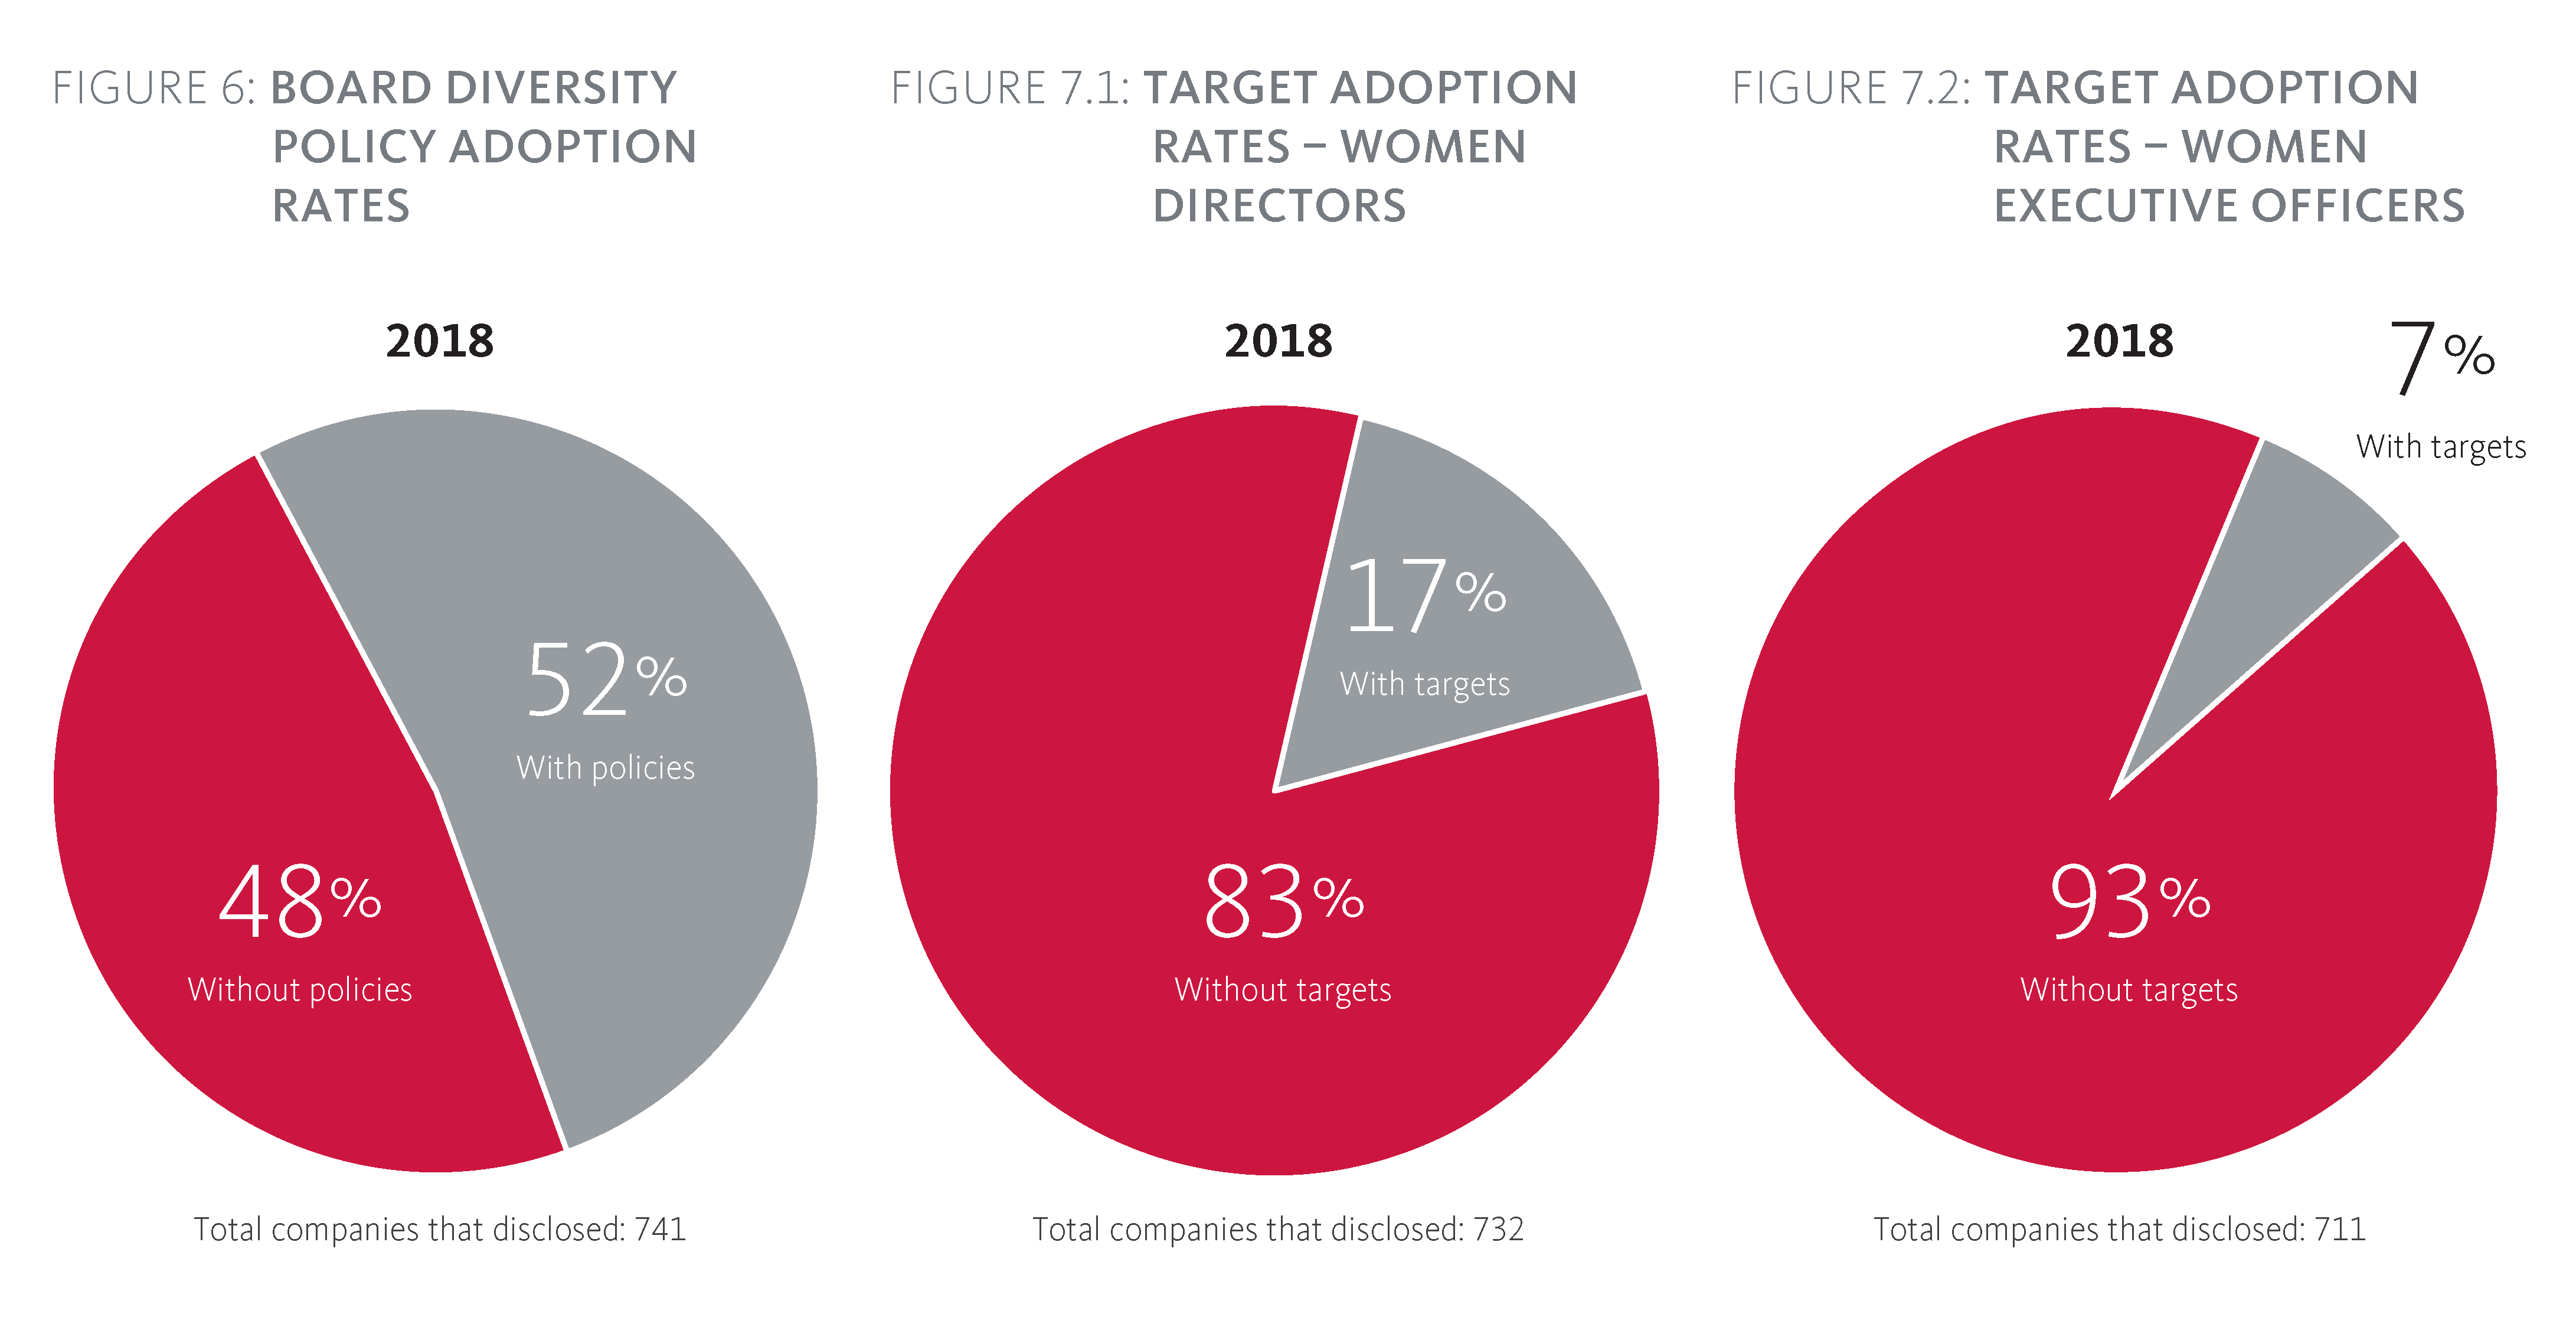 Adoption Rates, Target Adoption Rates for Women Directors and Executive Officers